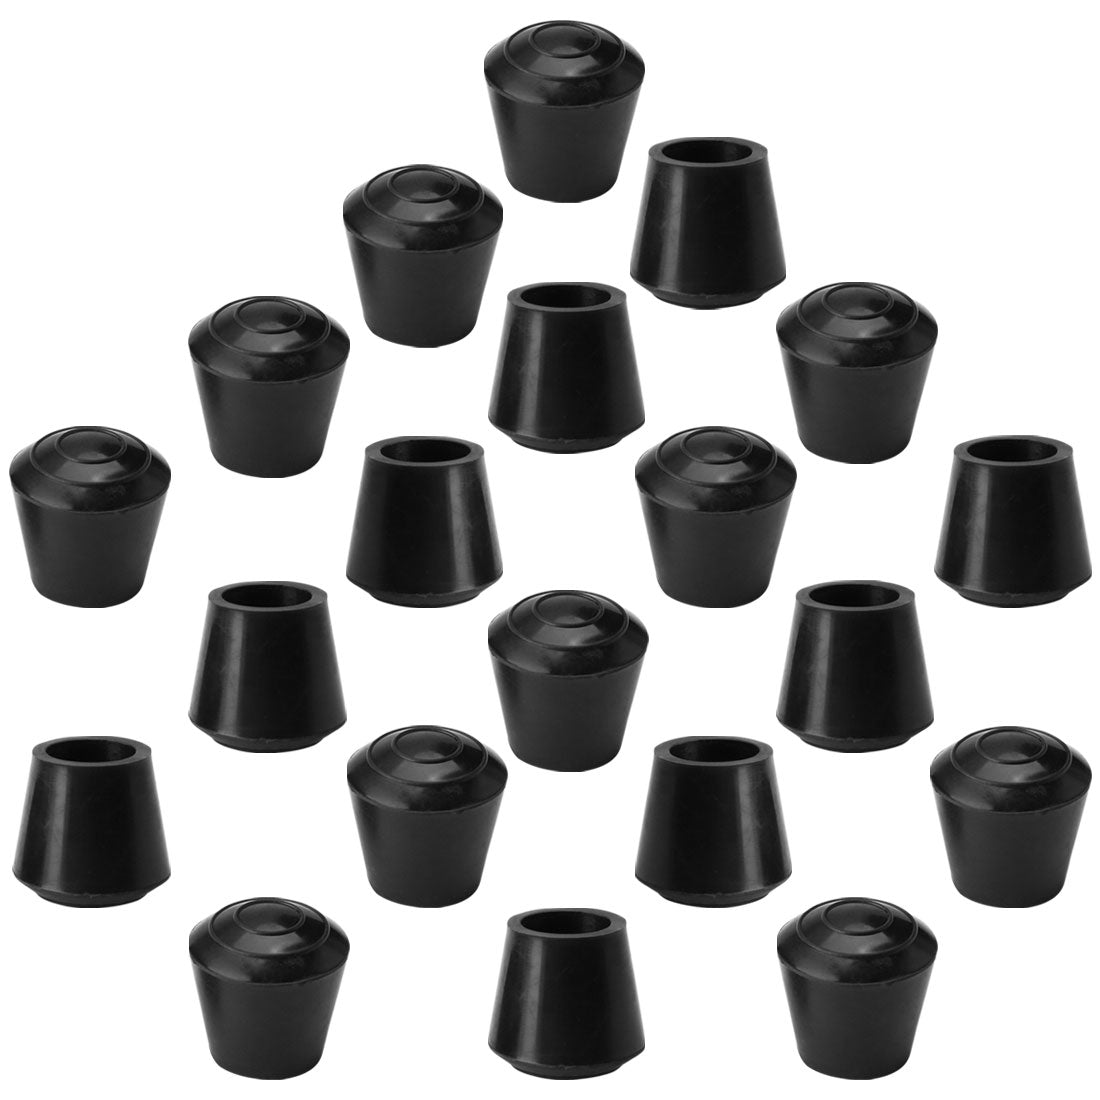 uxcell Uxcell Rubber Leg Cap Tip Cup Feet Cover 13mm Inner Dia 20pcs for Furniture Table